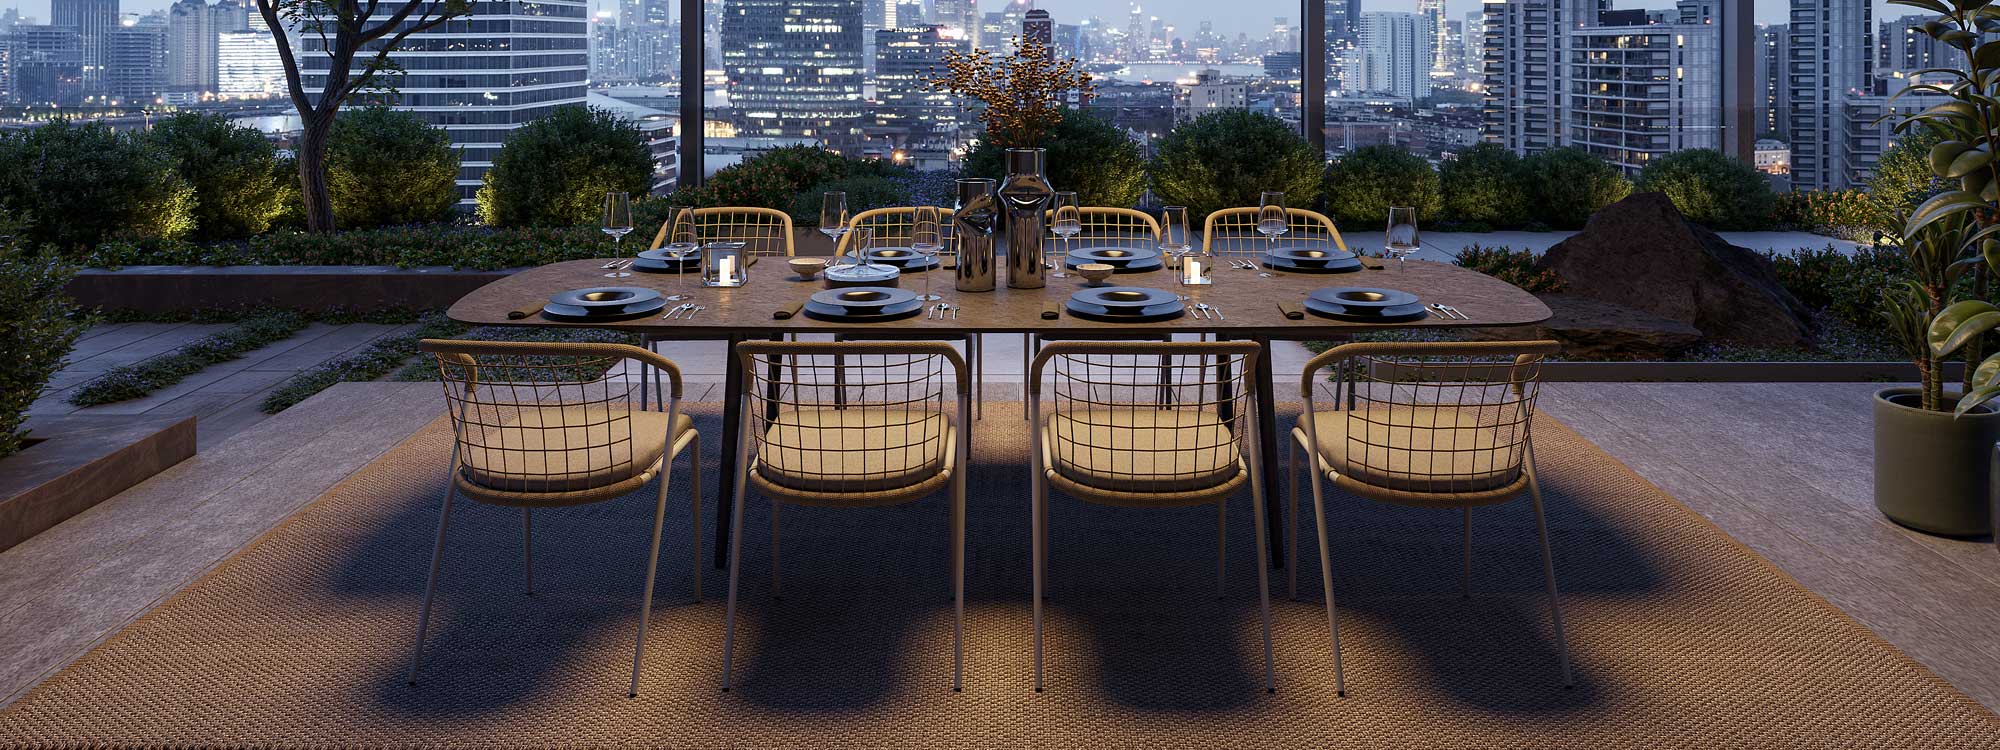 Image at dusk of rooftop terrace with Royal Botania Styletto dining table and Fensi chairs, with twinkling lights of city skyline in the background